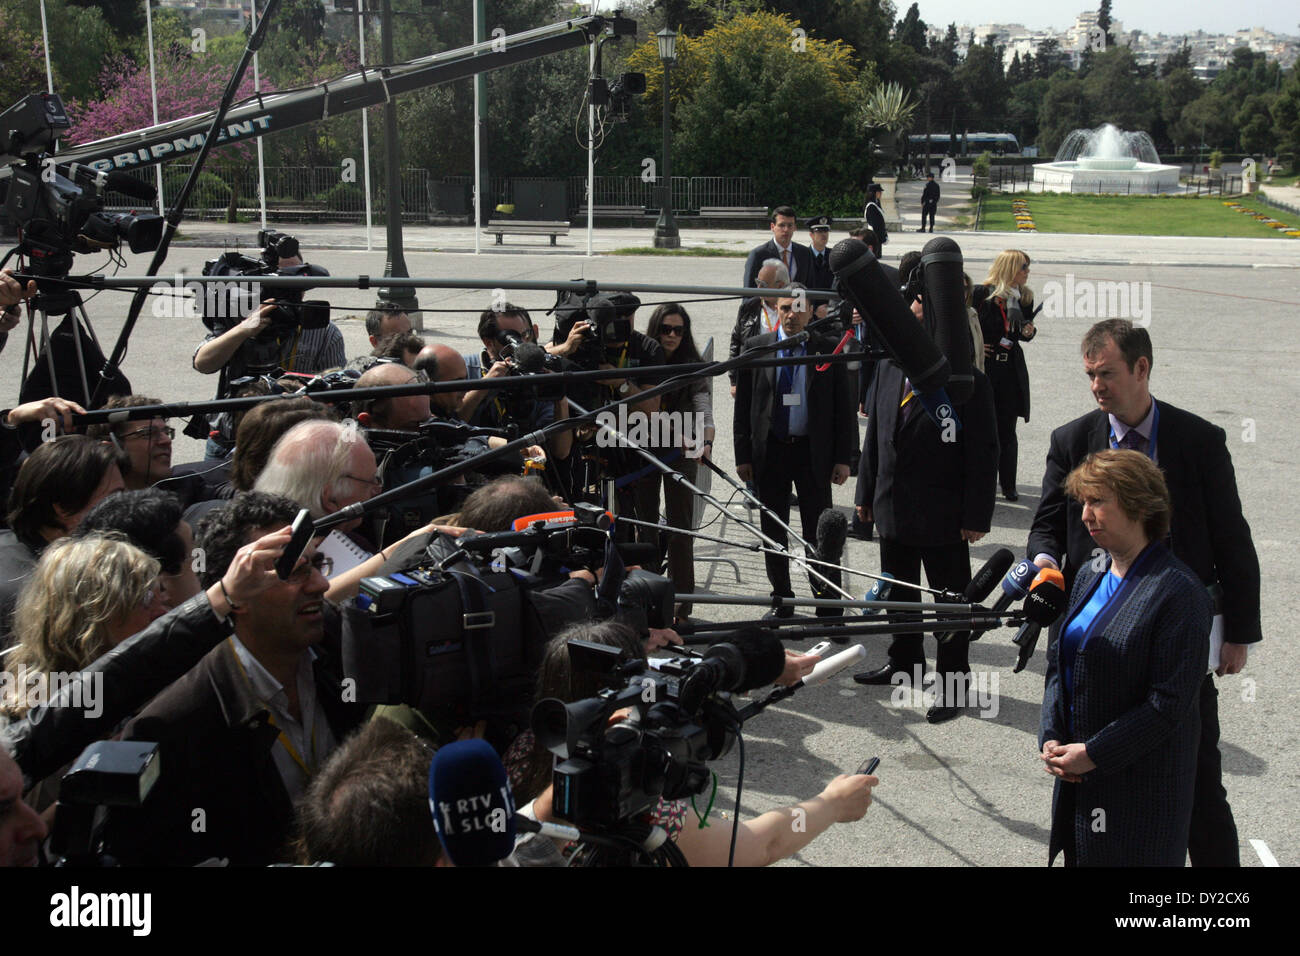 Athens, Greece. 4th Apr, 2014. Catherine Ashton (R front), the EU's High Representative for Foreign Affairs and Security Policy, arrives for the Informal Meeting of Foreign Affairs Ministers at the Zappeion Hall in Athens, capital of Greece, on April 4, 2014. © Marios Lolos/Xinhua/Alamy Live News Stock Photo